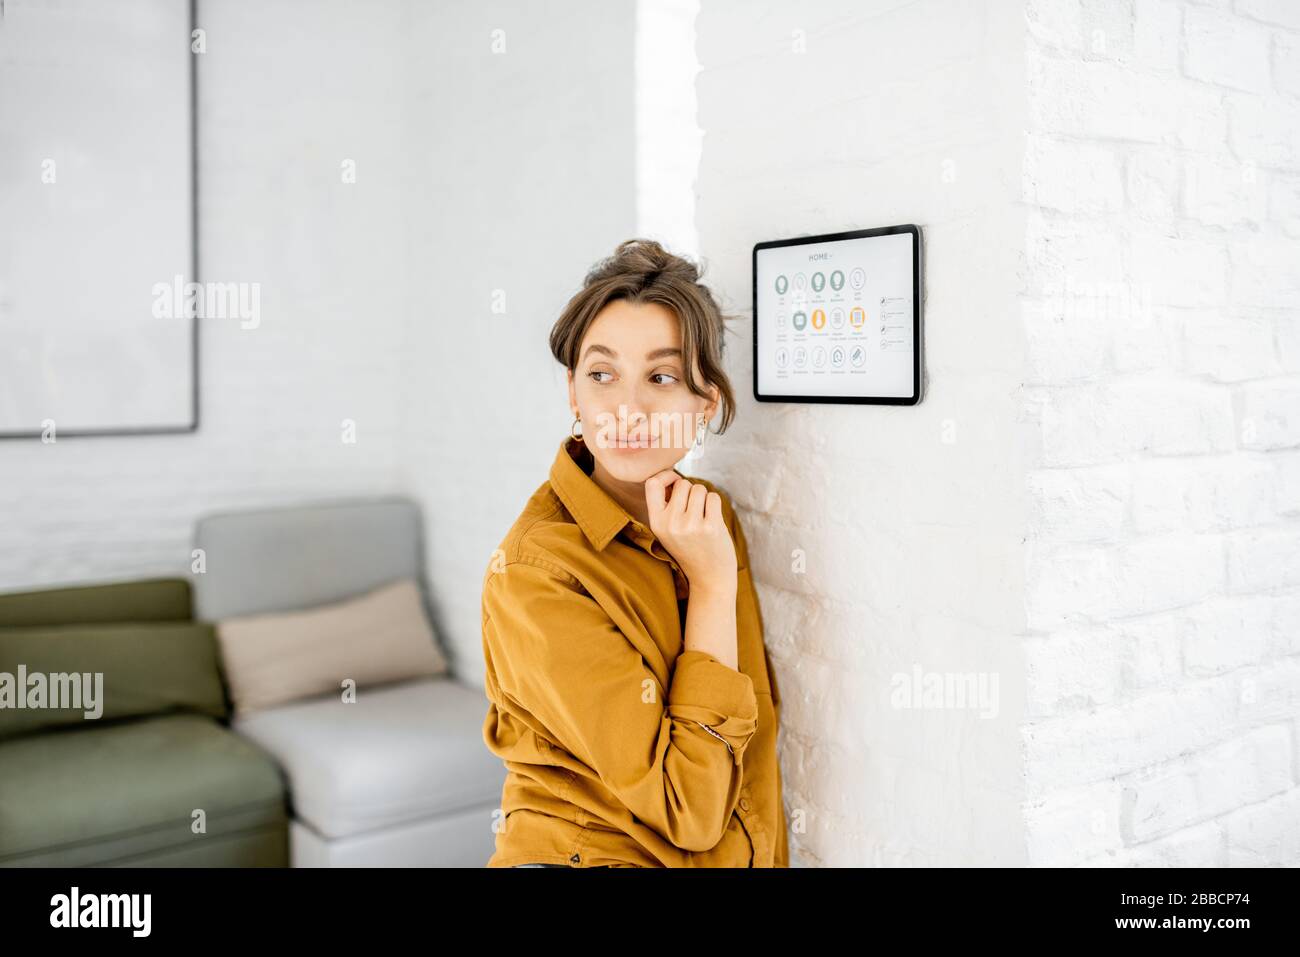 Portrait of a happy young woman controlling home with a digital touch screen panel installed on the wall in the living room Stock Photo